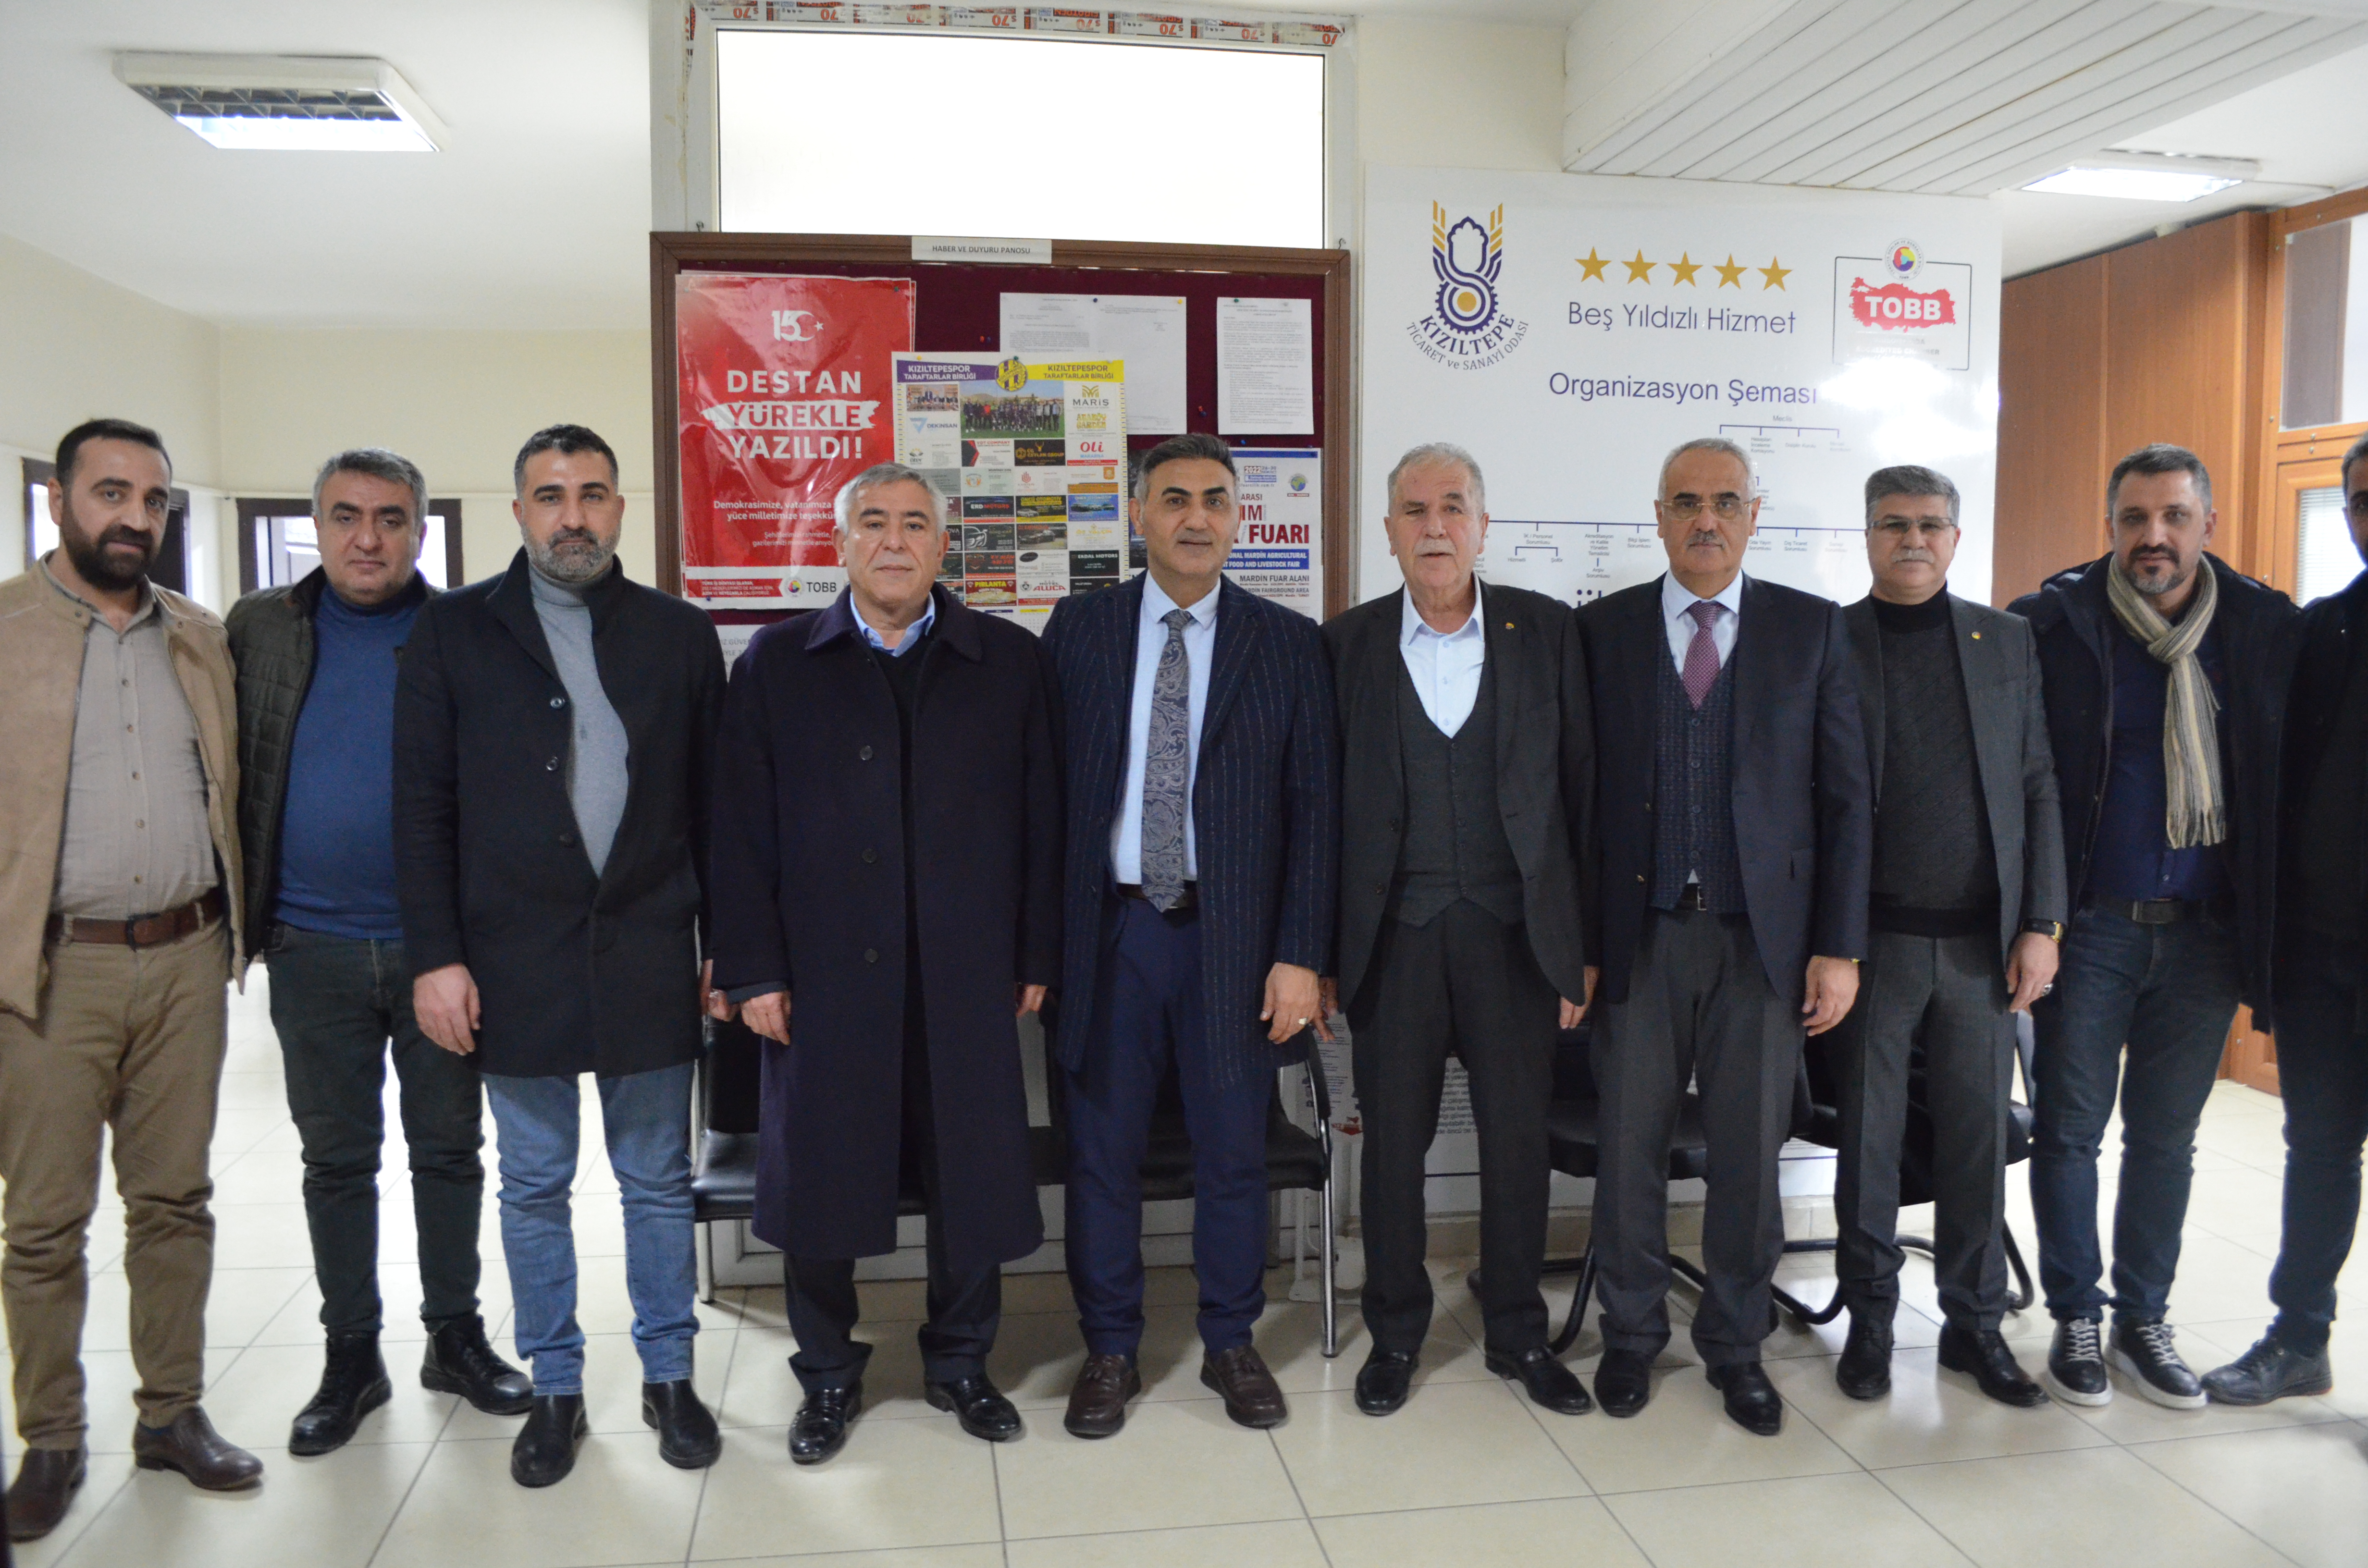  Mardin Chamber of Commerce and Industry (MTSO) Visits our Chamber.